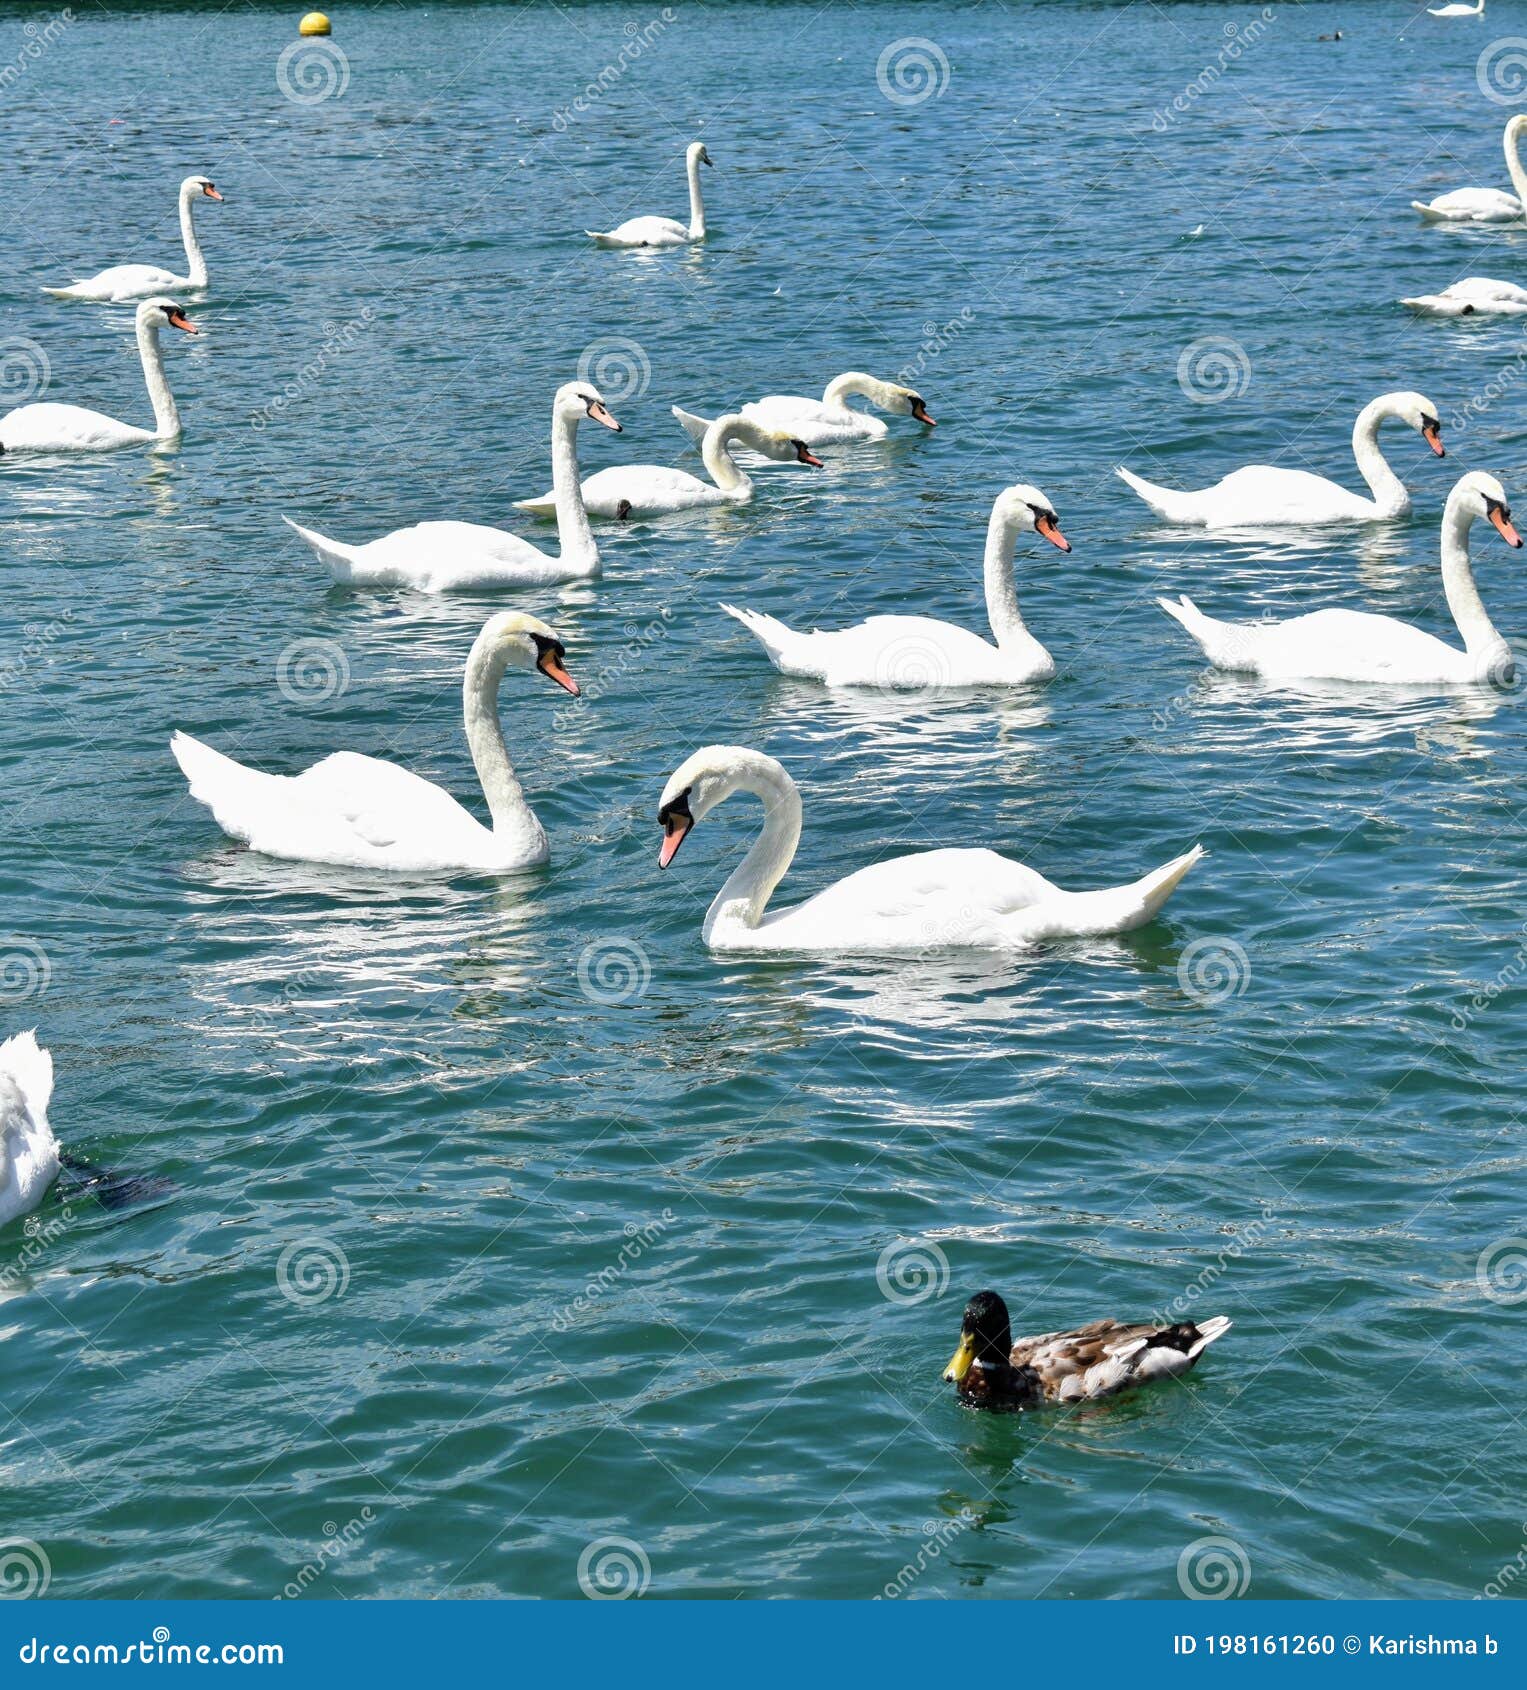 List 99+ Images what is a group of swans Full HD, 2k, 4k